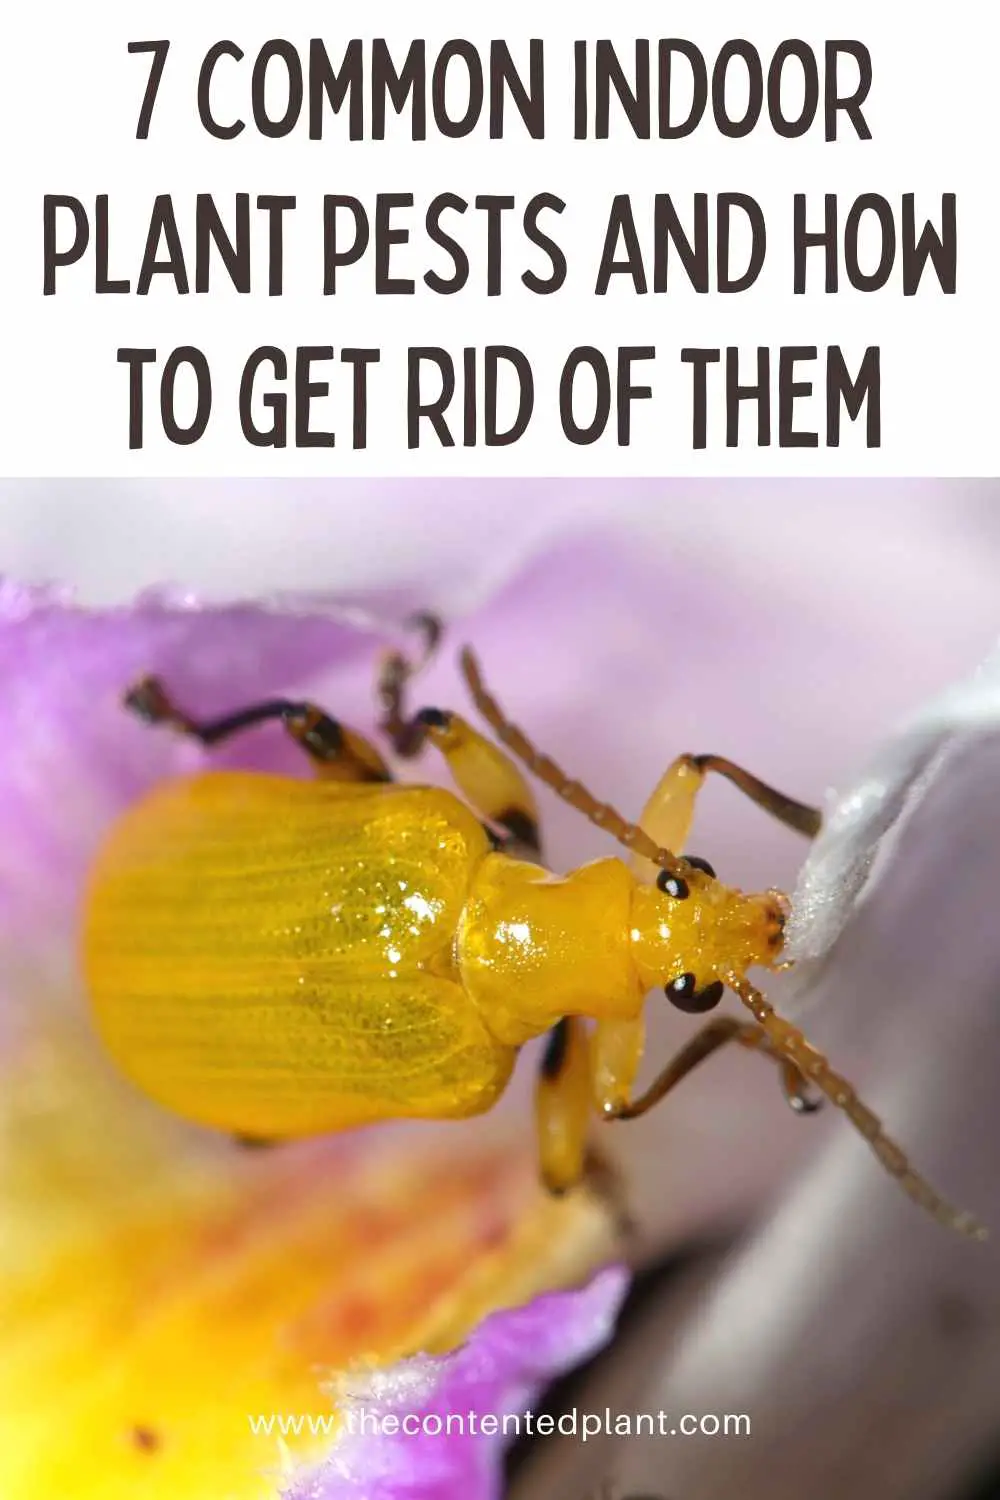 7 common indoor plant pests and how to get rid of them -pin image